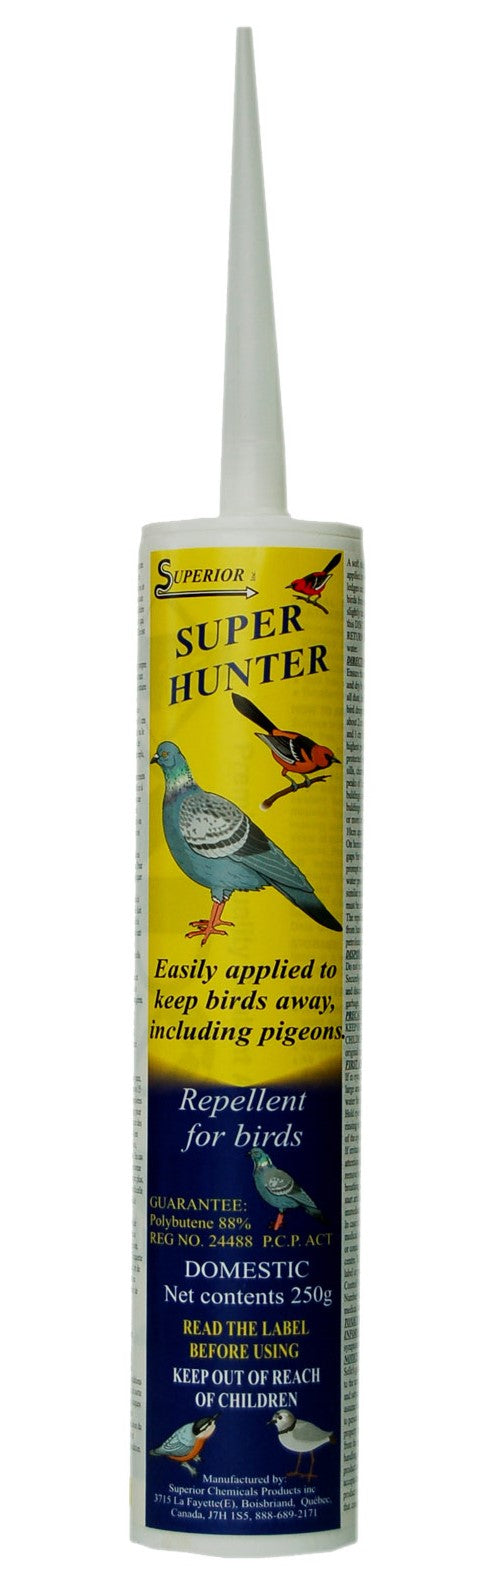 CHS Super Hunter Pigeon & Bird Guarantee : Polybutene 88%, ticky paste repellent to chase away pigeons and birds Only one application per season. Harmless to birds